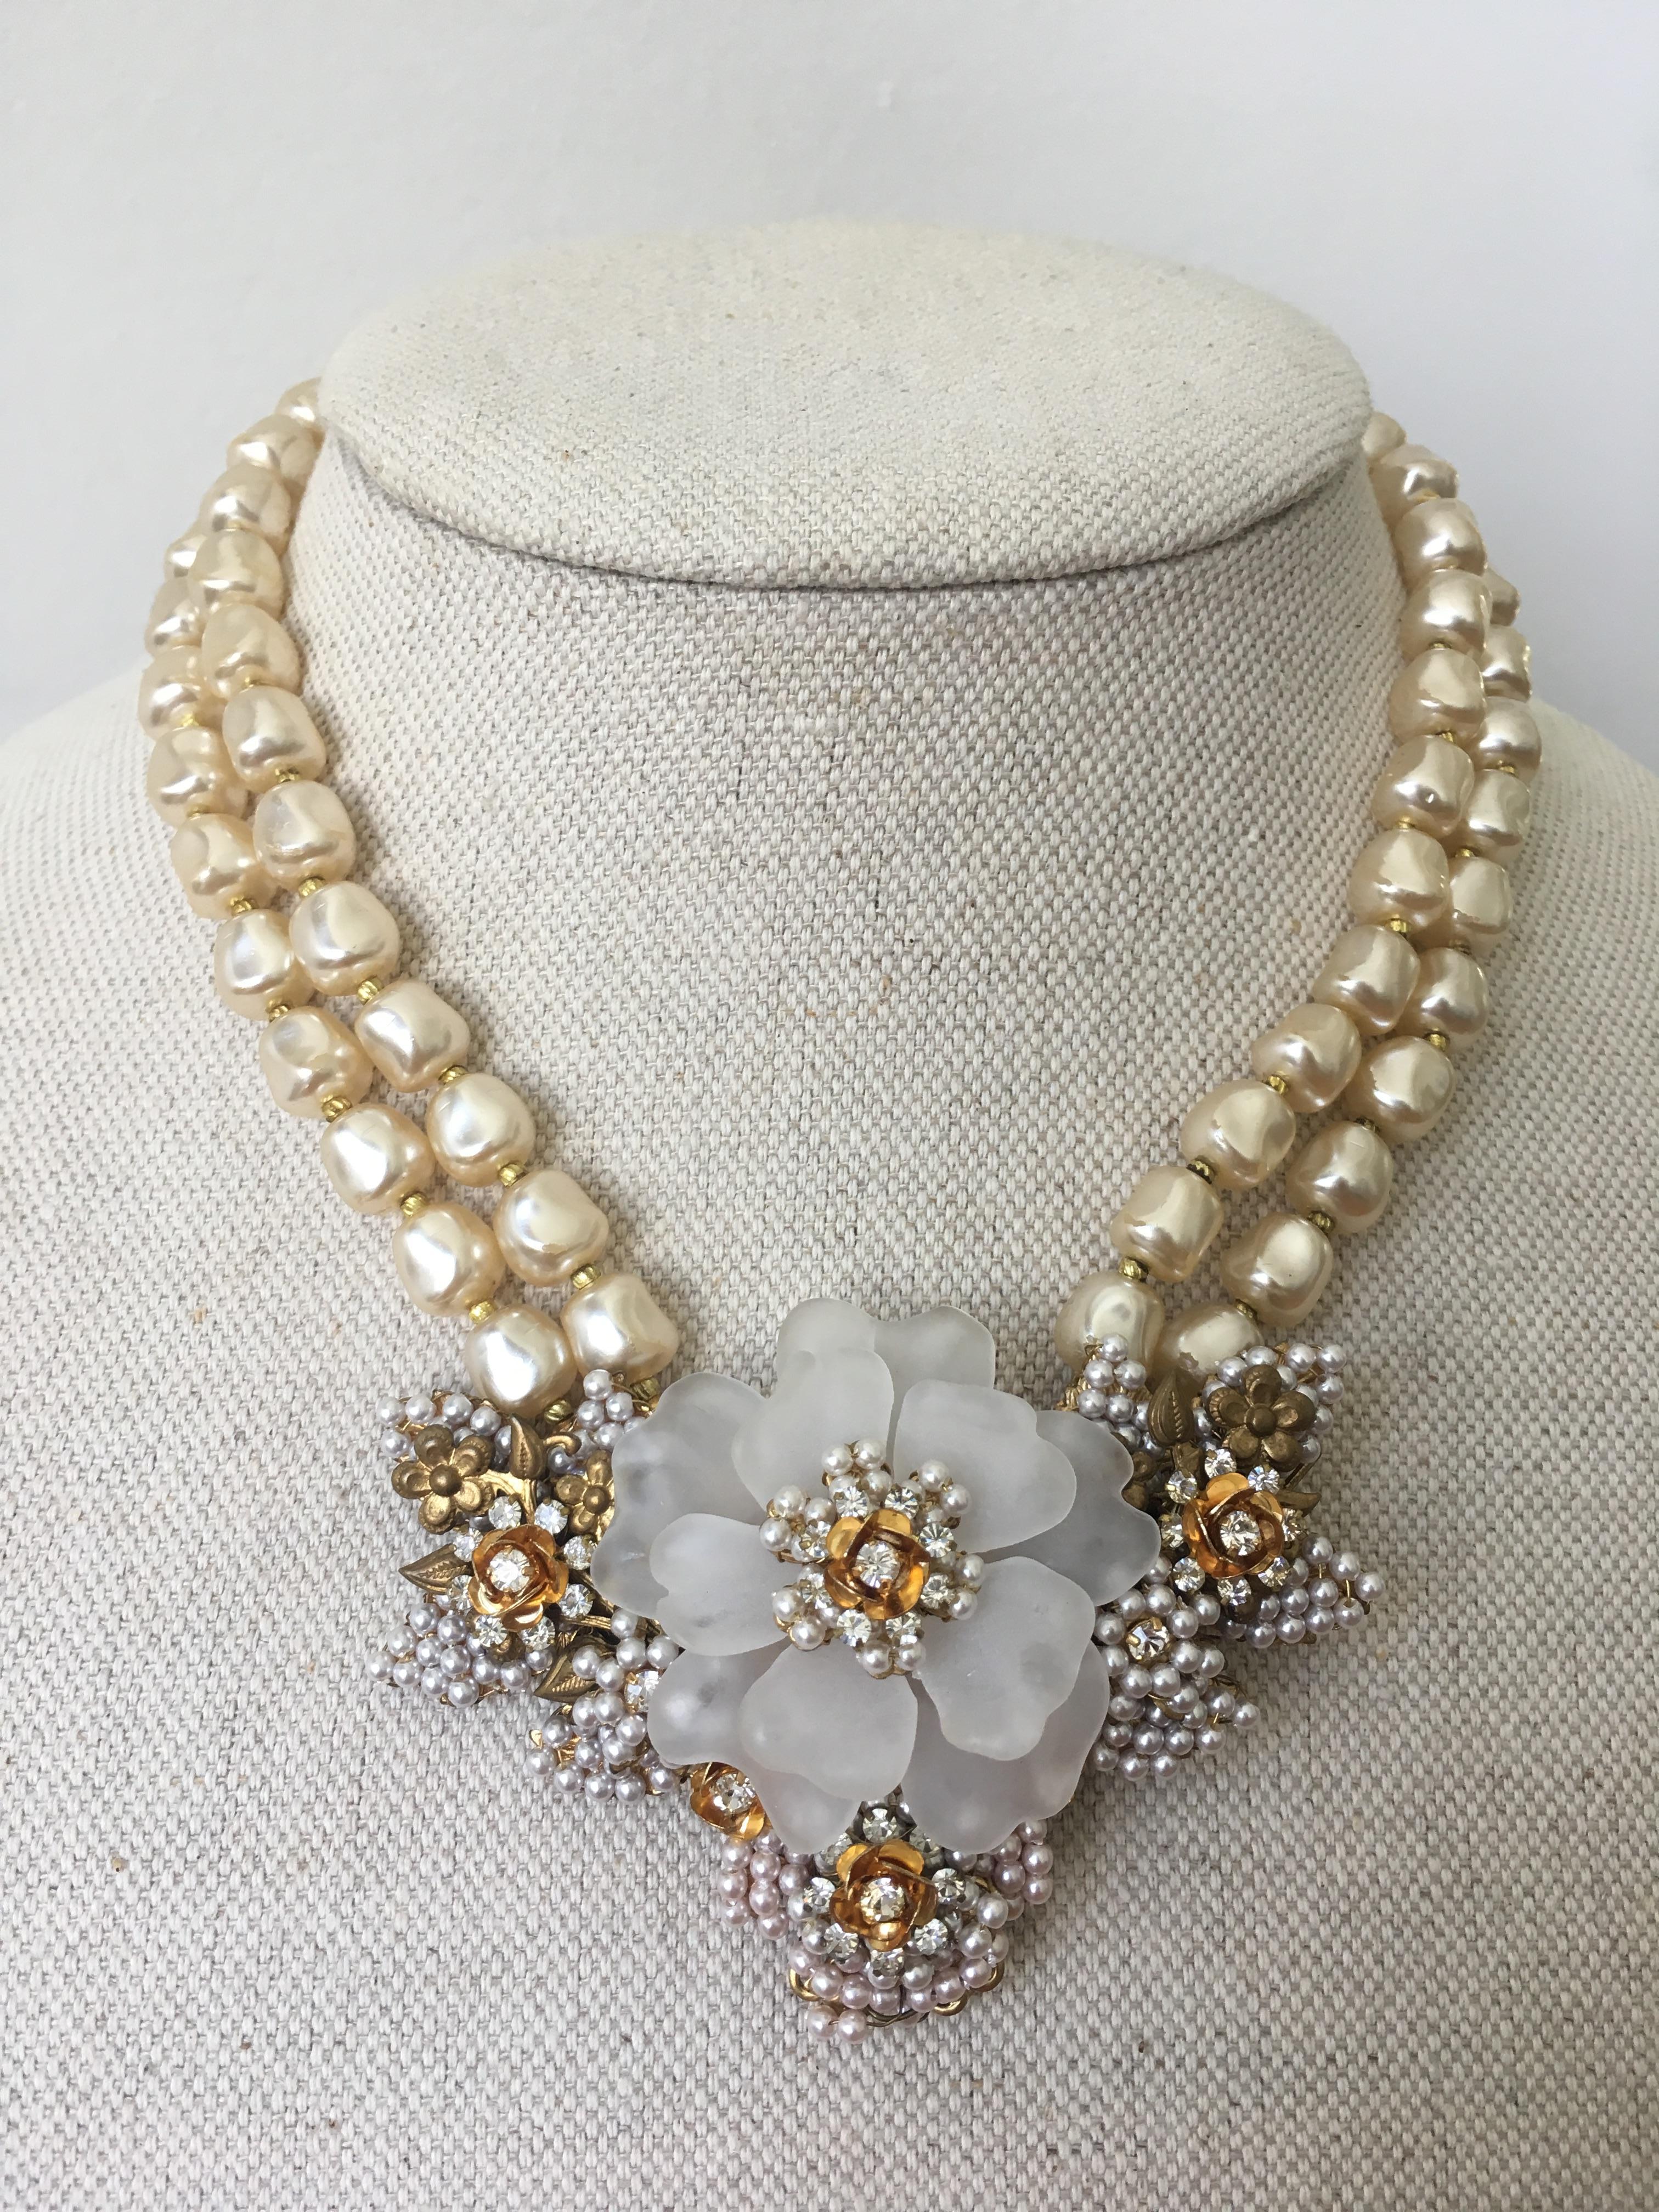 This stunning Camellia, pearl and crystal necklace has the characteristic features of Stanley Hagler's work but no oval stamp is present.

Similar to the work of Stanley Hagler jewelry this piece is wired by hand, with stones and crystals prong-set